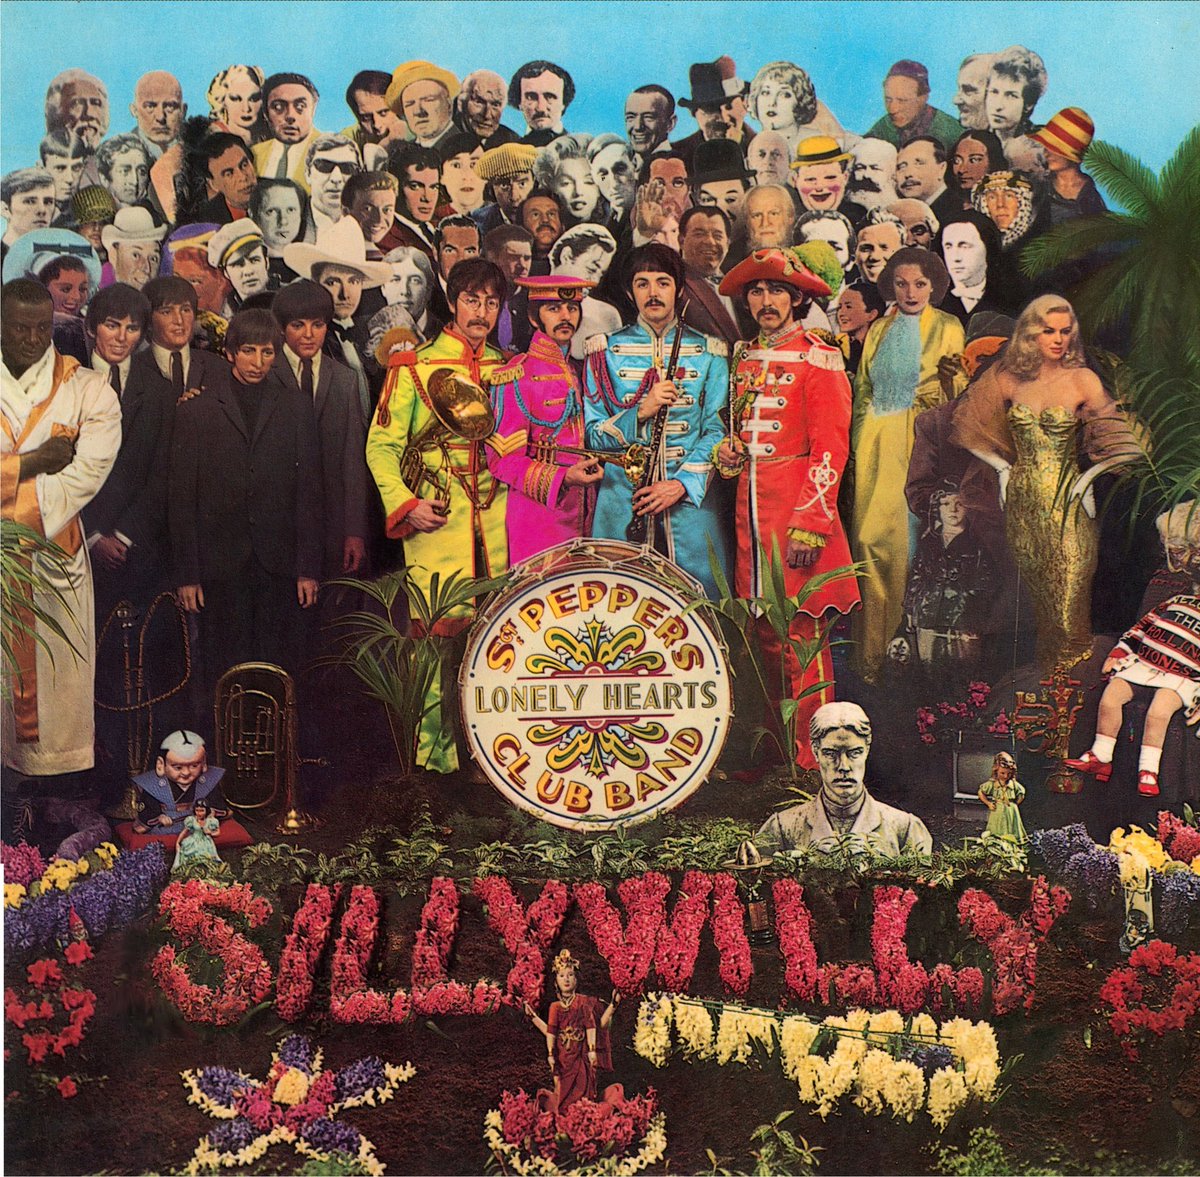 ICYMI On May 26 in history of #creative industries: The Beatles release in 1967 in United Kingdom the #innovative & groundbreaking Sgt. Pepper's Lonely Hearts Club Band album (released in the U.S. on June 2) @thebeatles @beatlesstory @AbbeyRoad @RIAA @Unite4Copyright #copyright